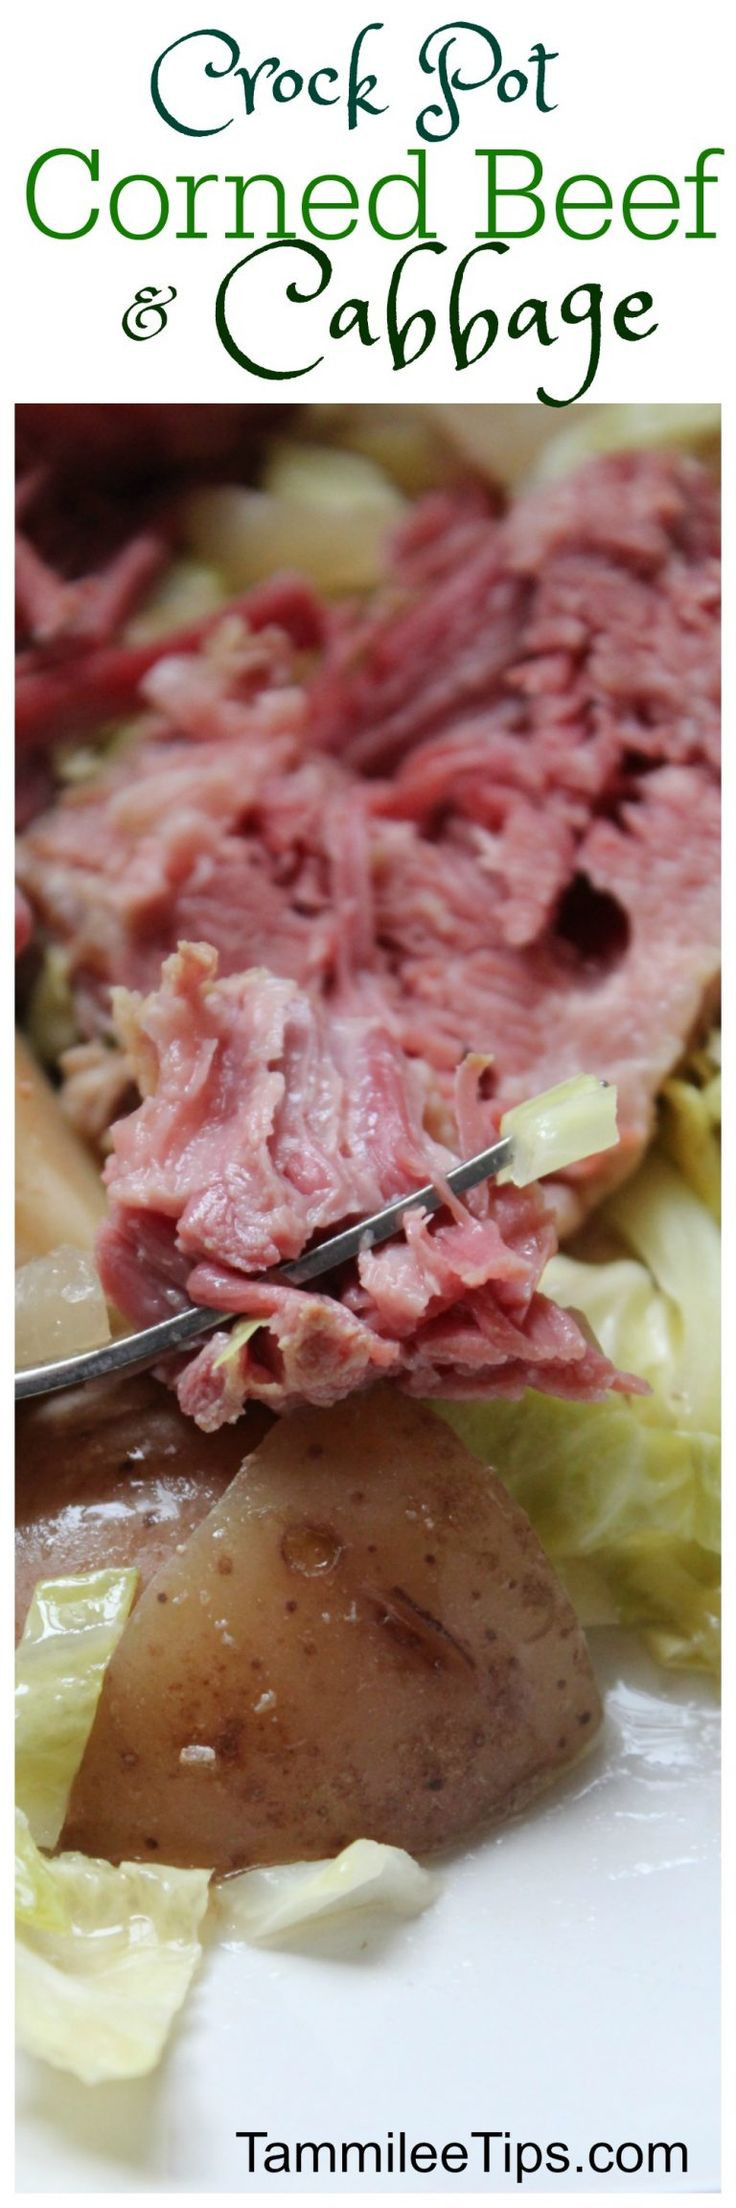 Canned Corned Beef And Cabbage
 1000 ideas about Canned Corned Beef Recipe on Pinterest